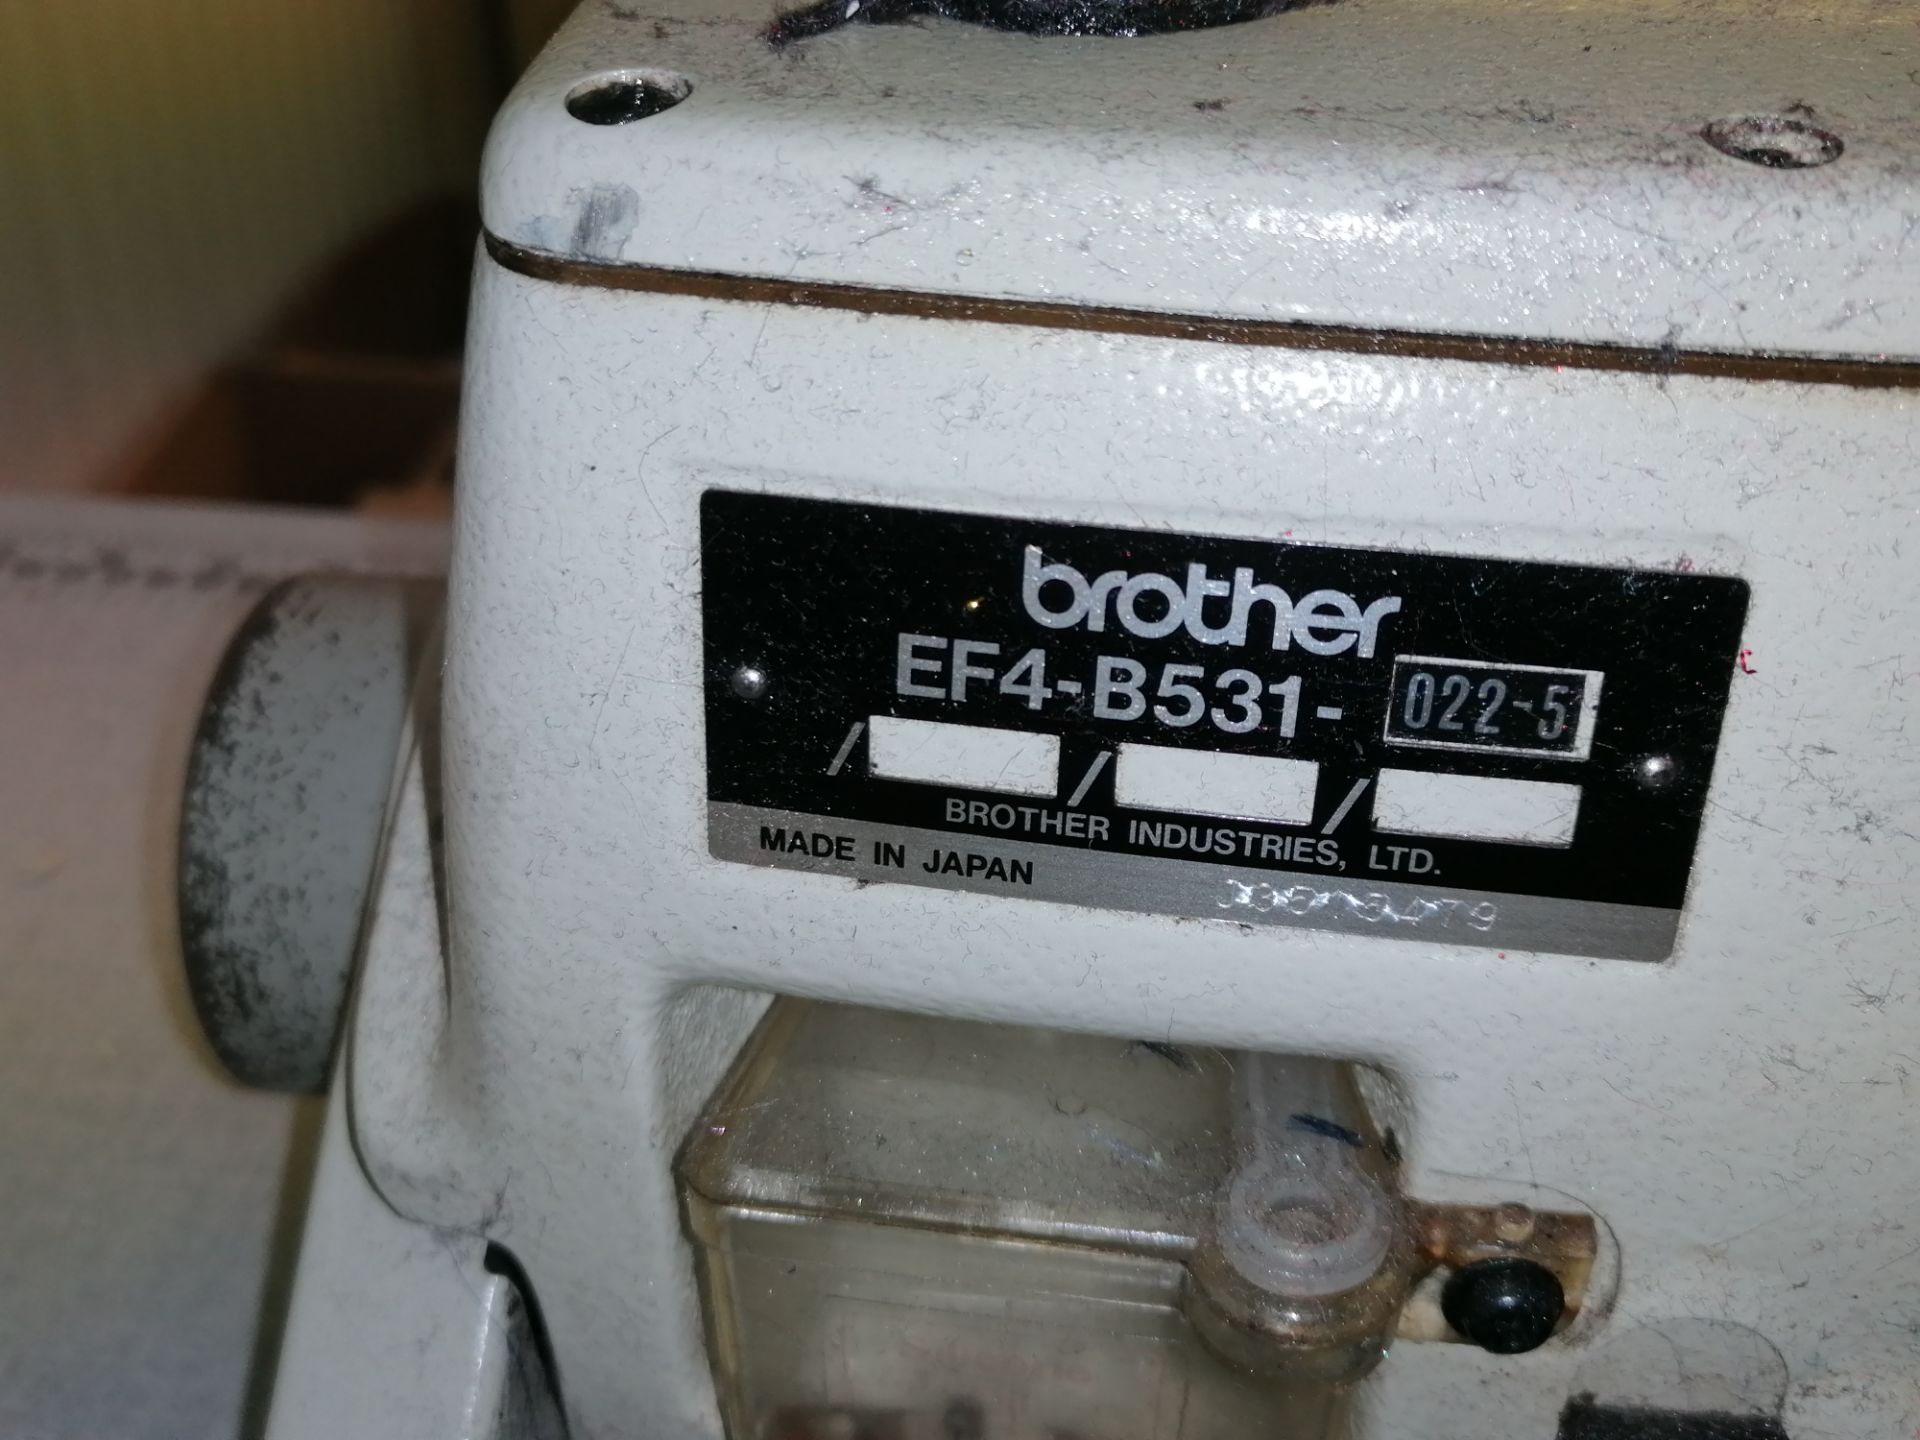 Brother EF4 - B531- 022-5 Industrial 4 thread over locker sewing machine Serial No J3515479 - Image 5 of 5